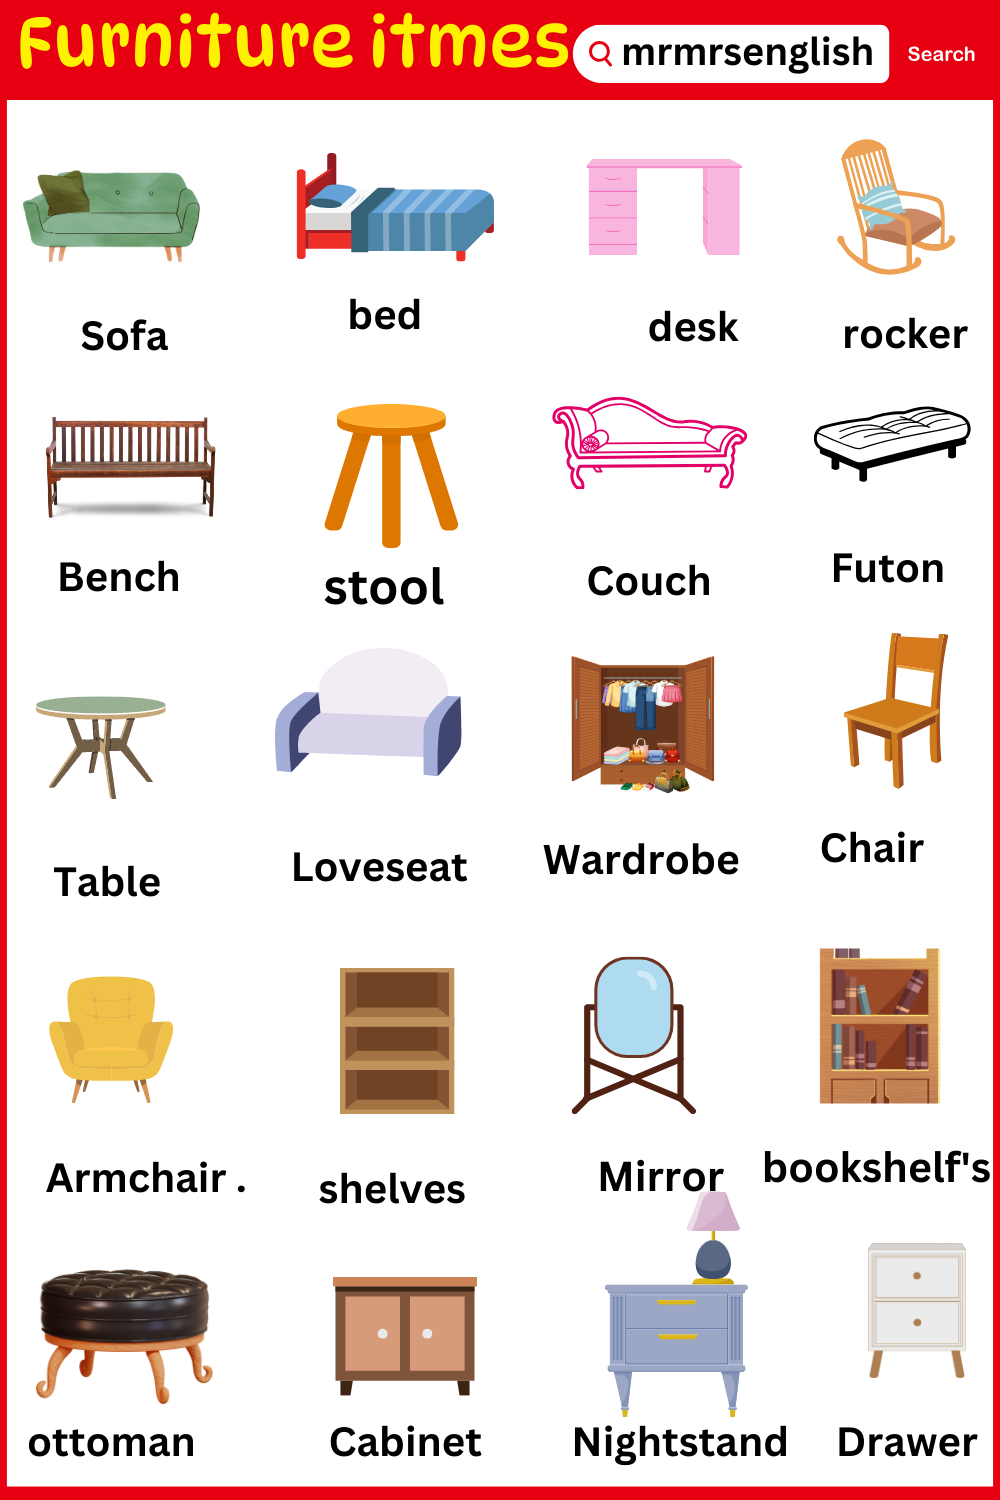 Furniture items names with Pictures: